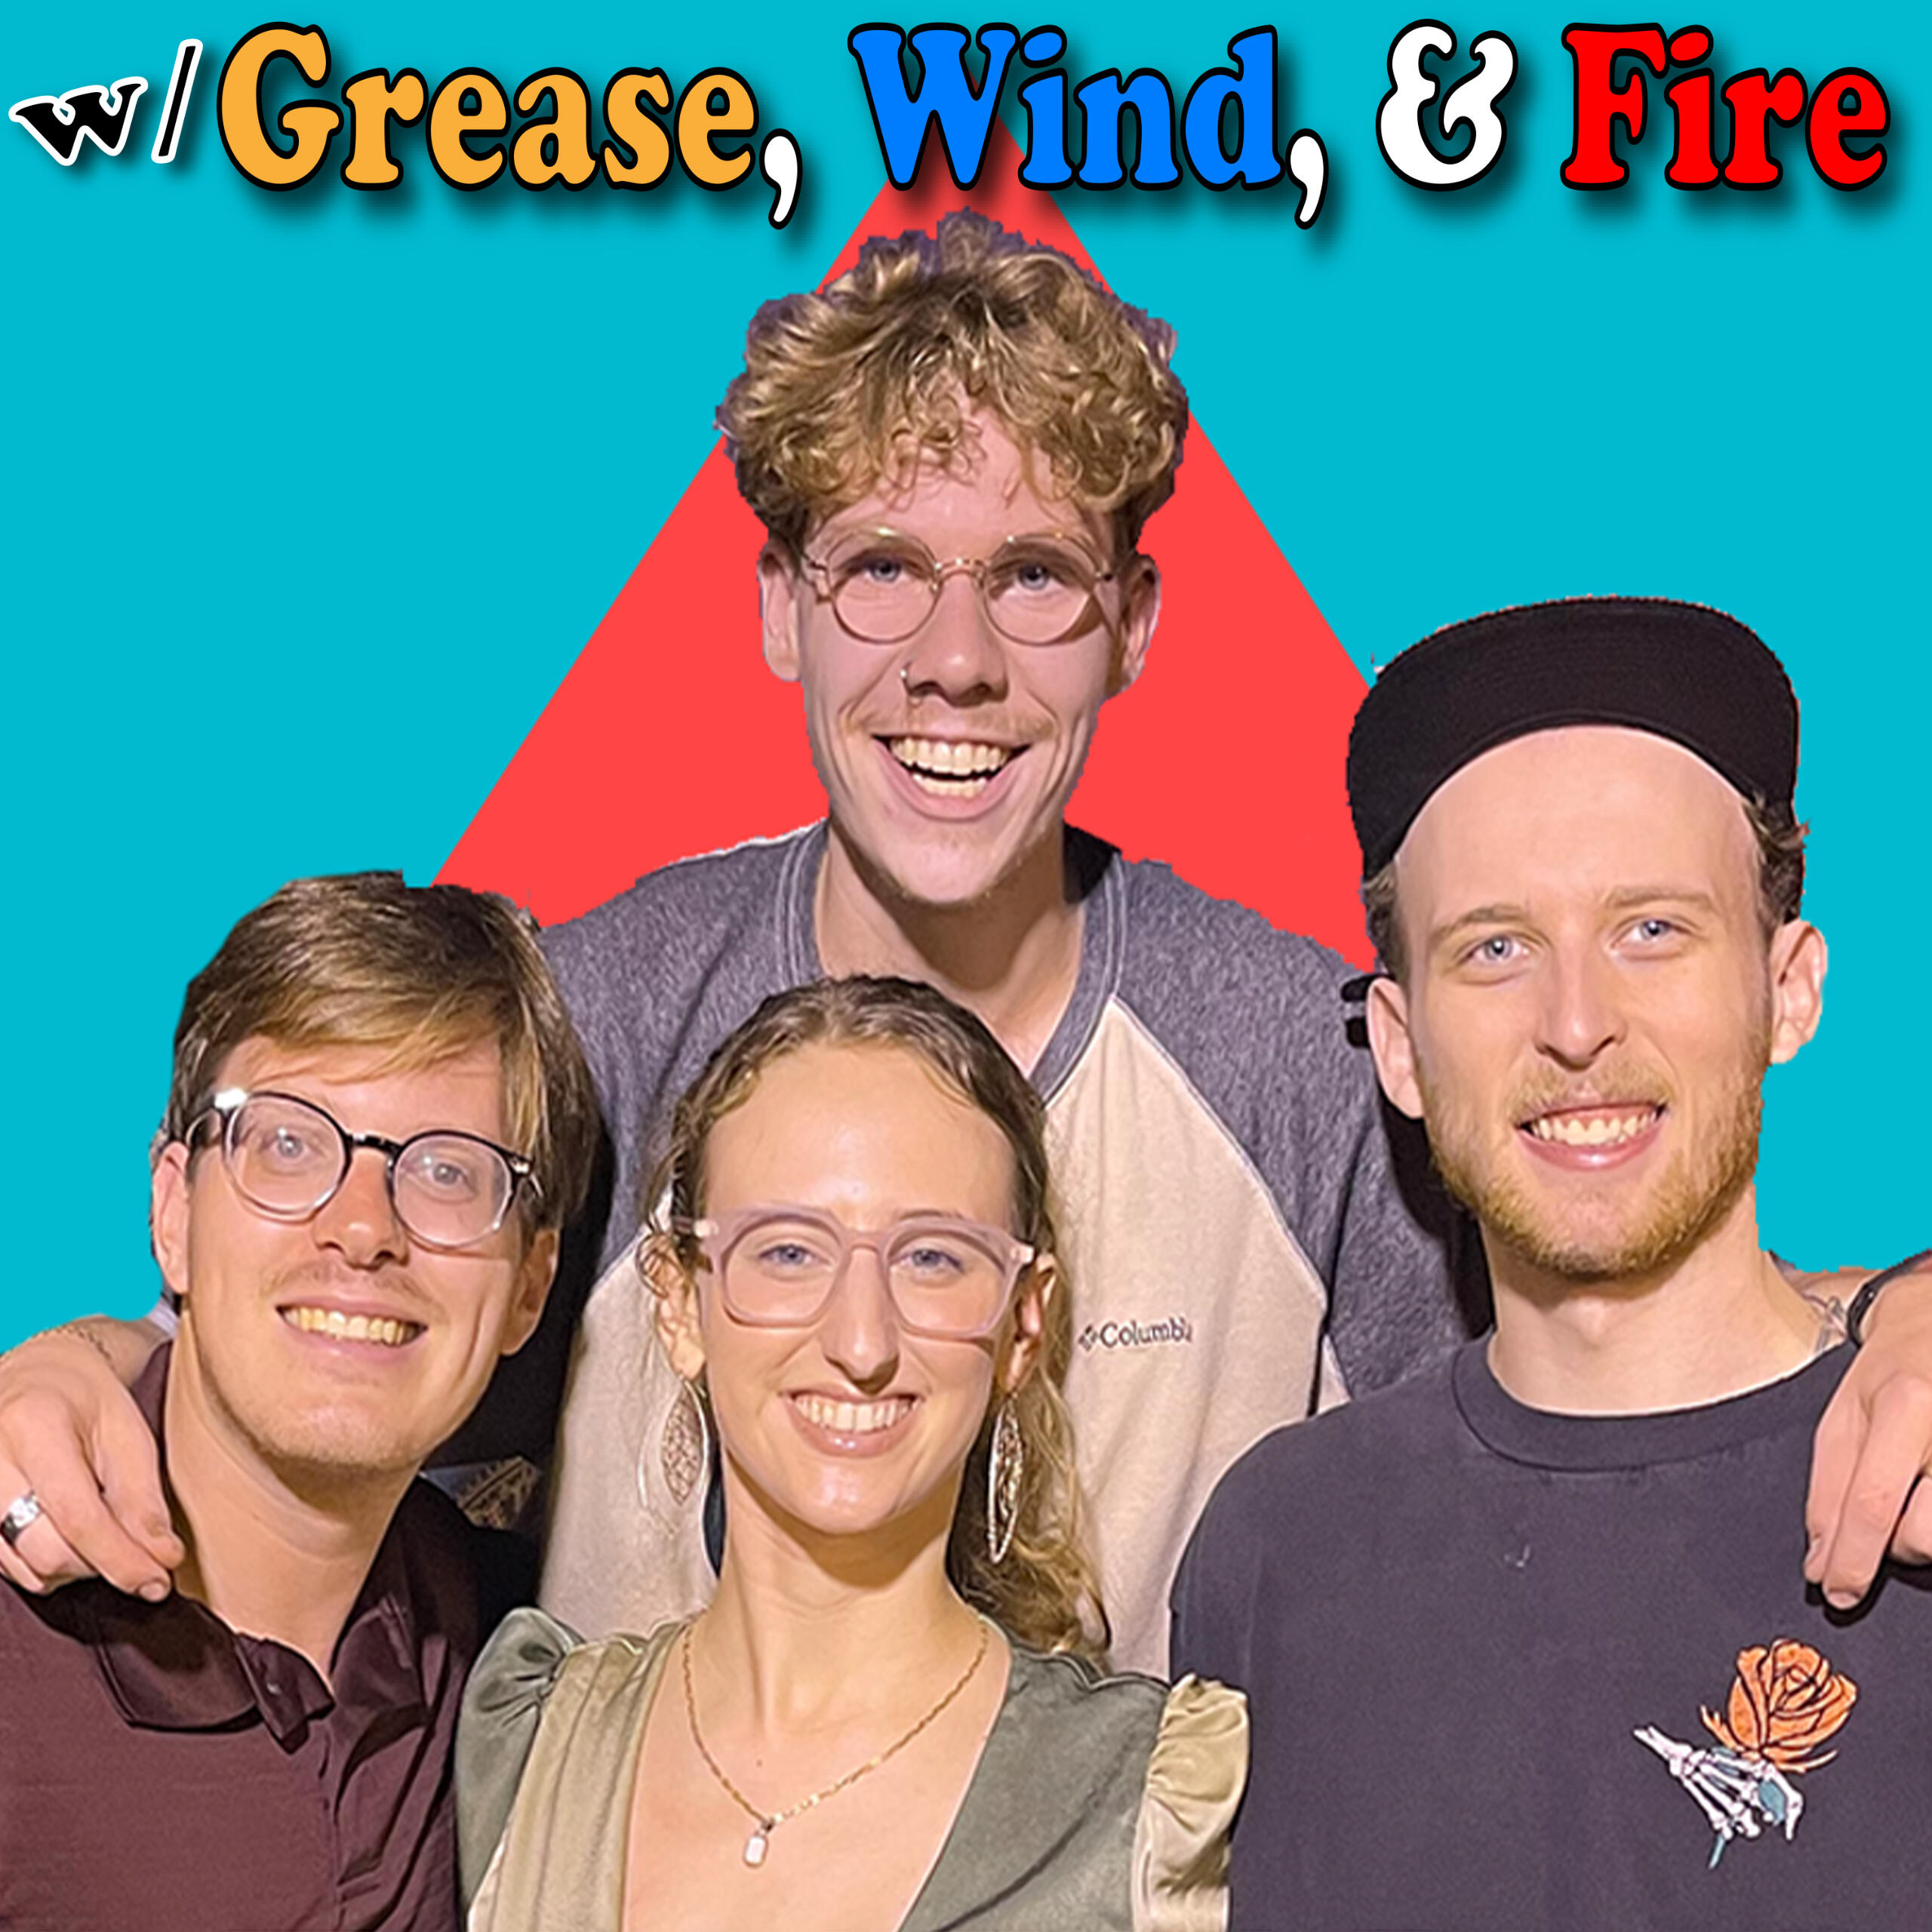 Post-Fun Podcasts | With Grease, Wind, & Fire, an improv podcast